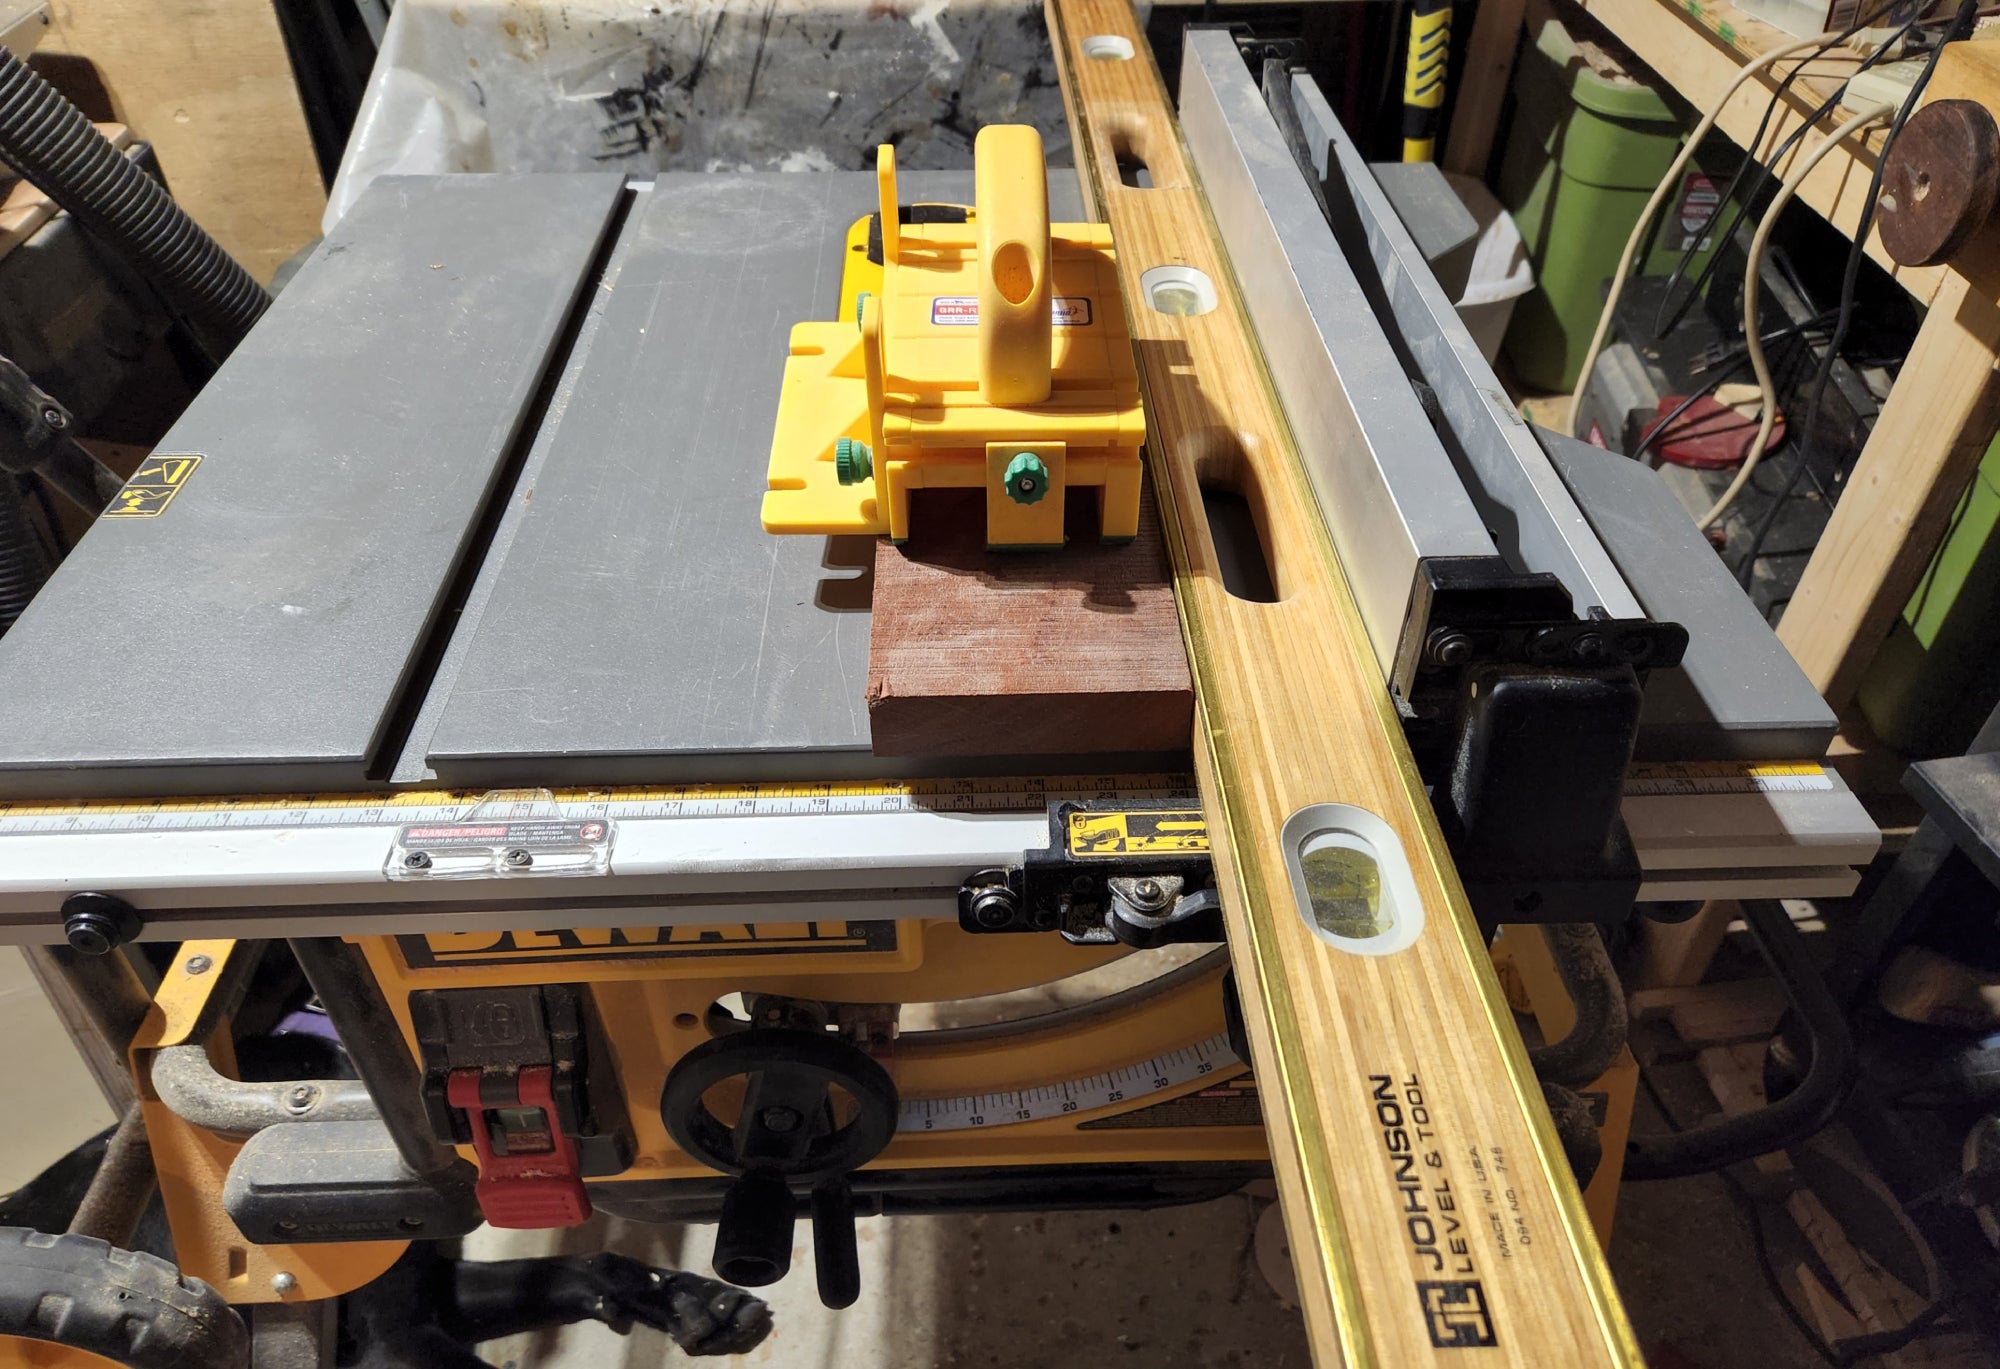 A person using a level to joint wood without a jointer, by having the level pressed against their table saw fence as a guide for the piece of wood. They're also using a push block for safety.